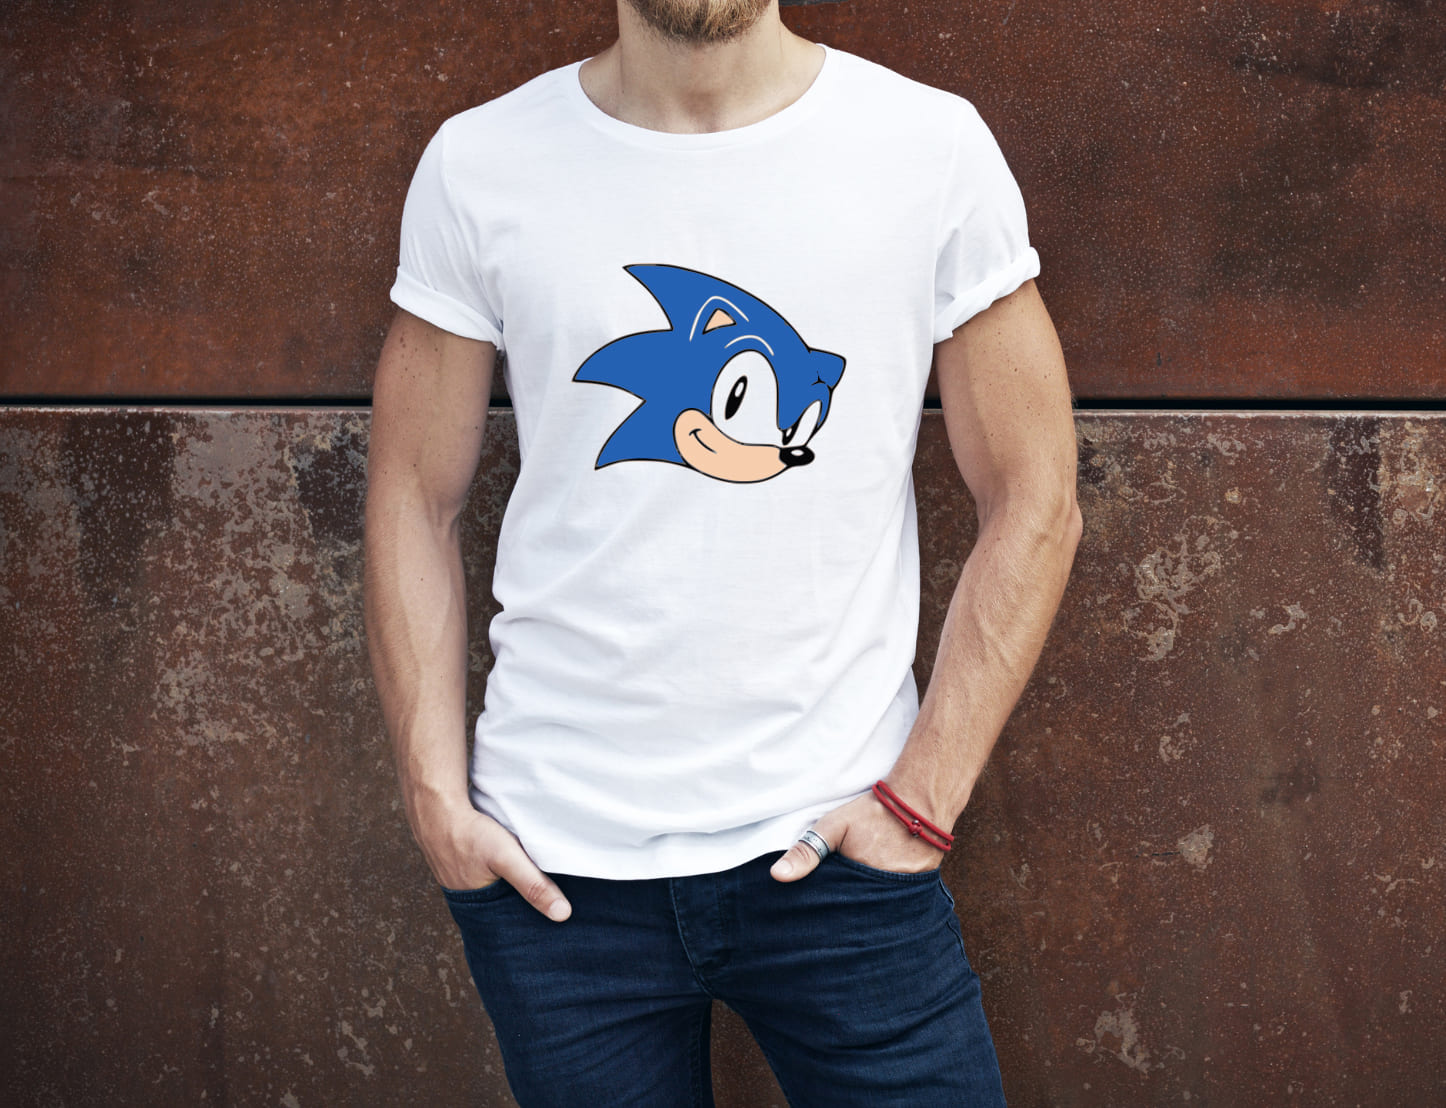 Sonic face on a white t-shirt.